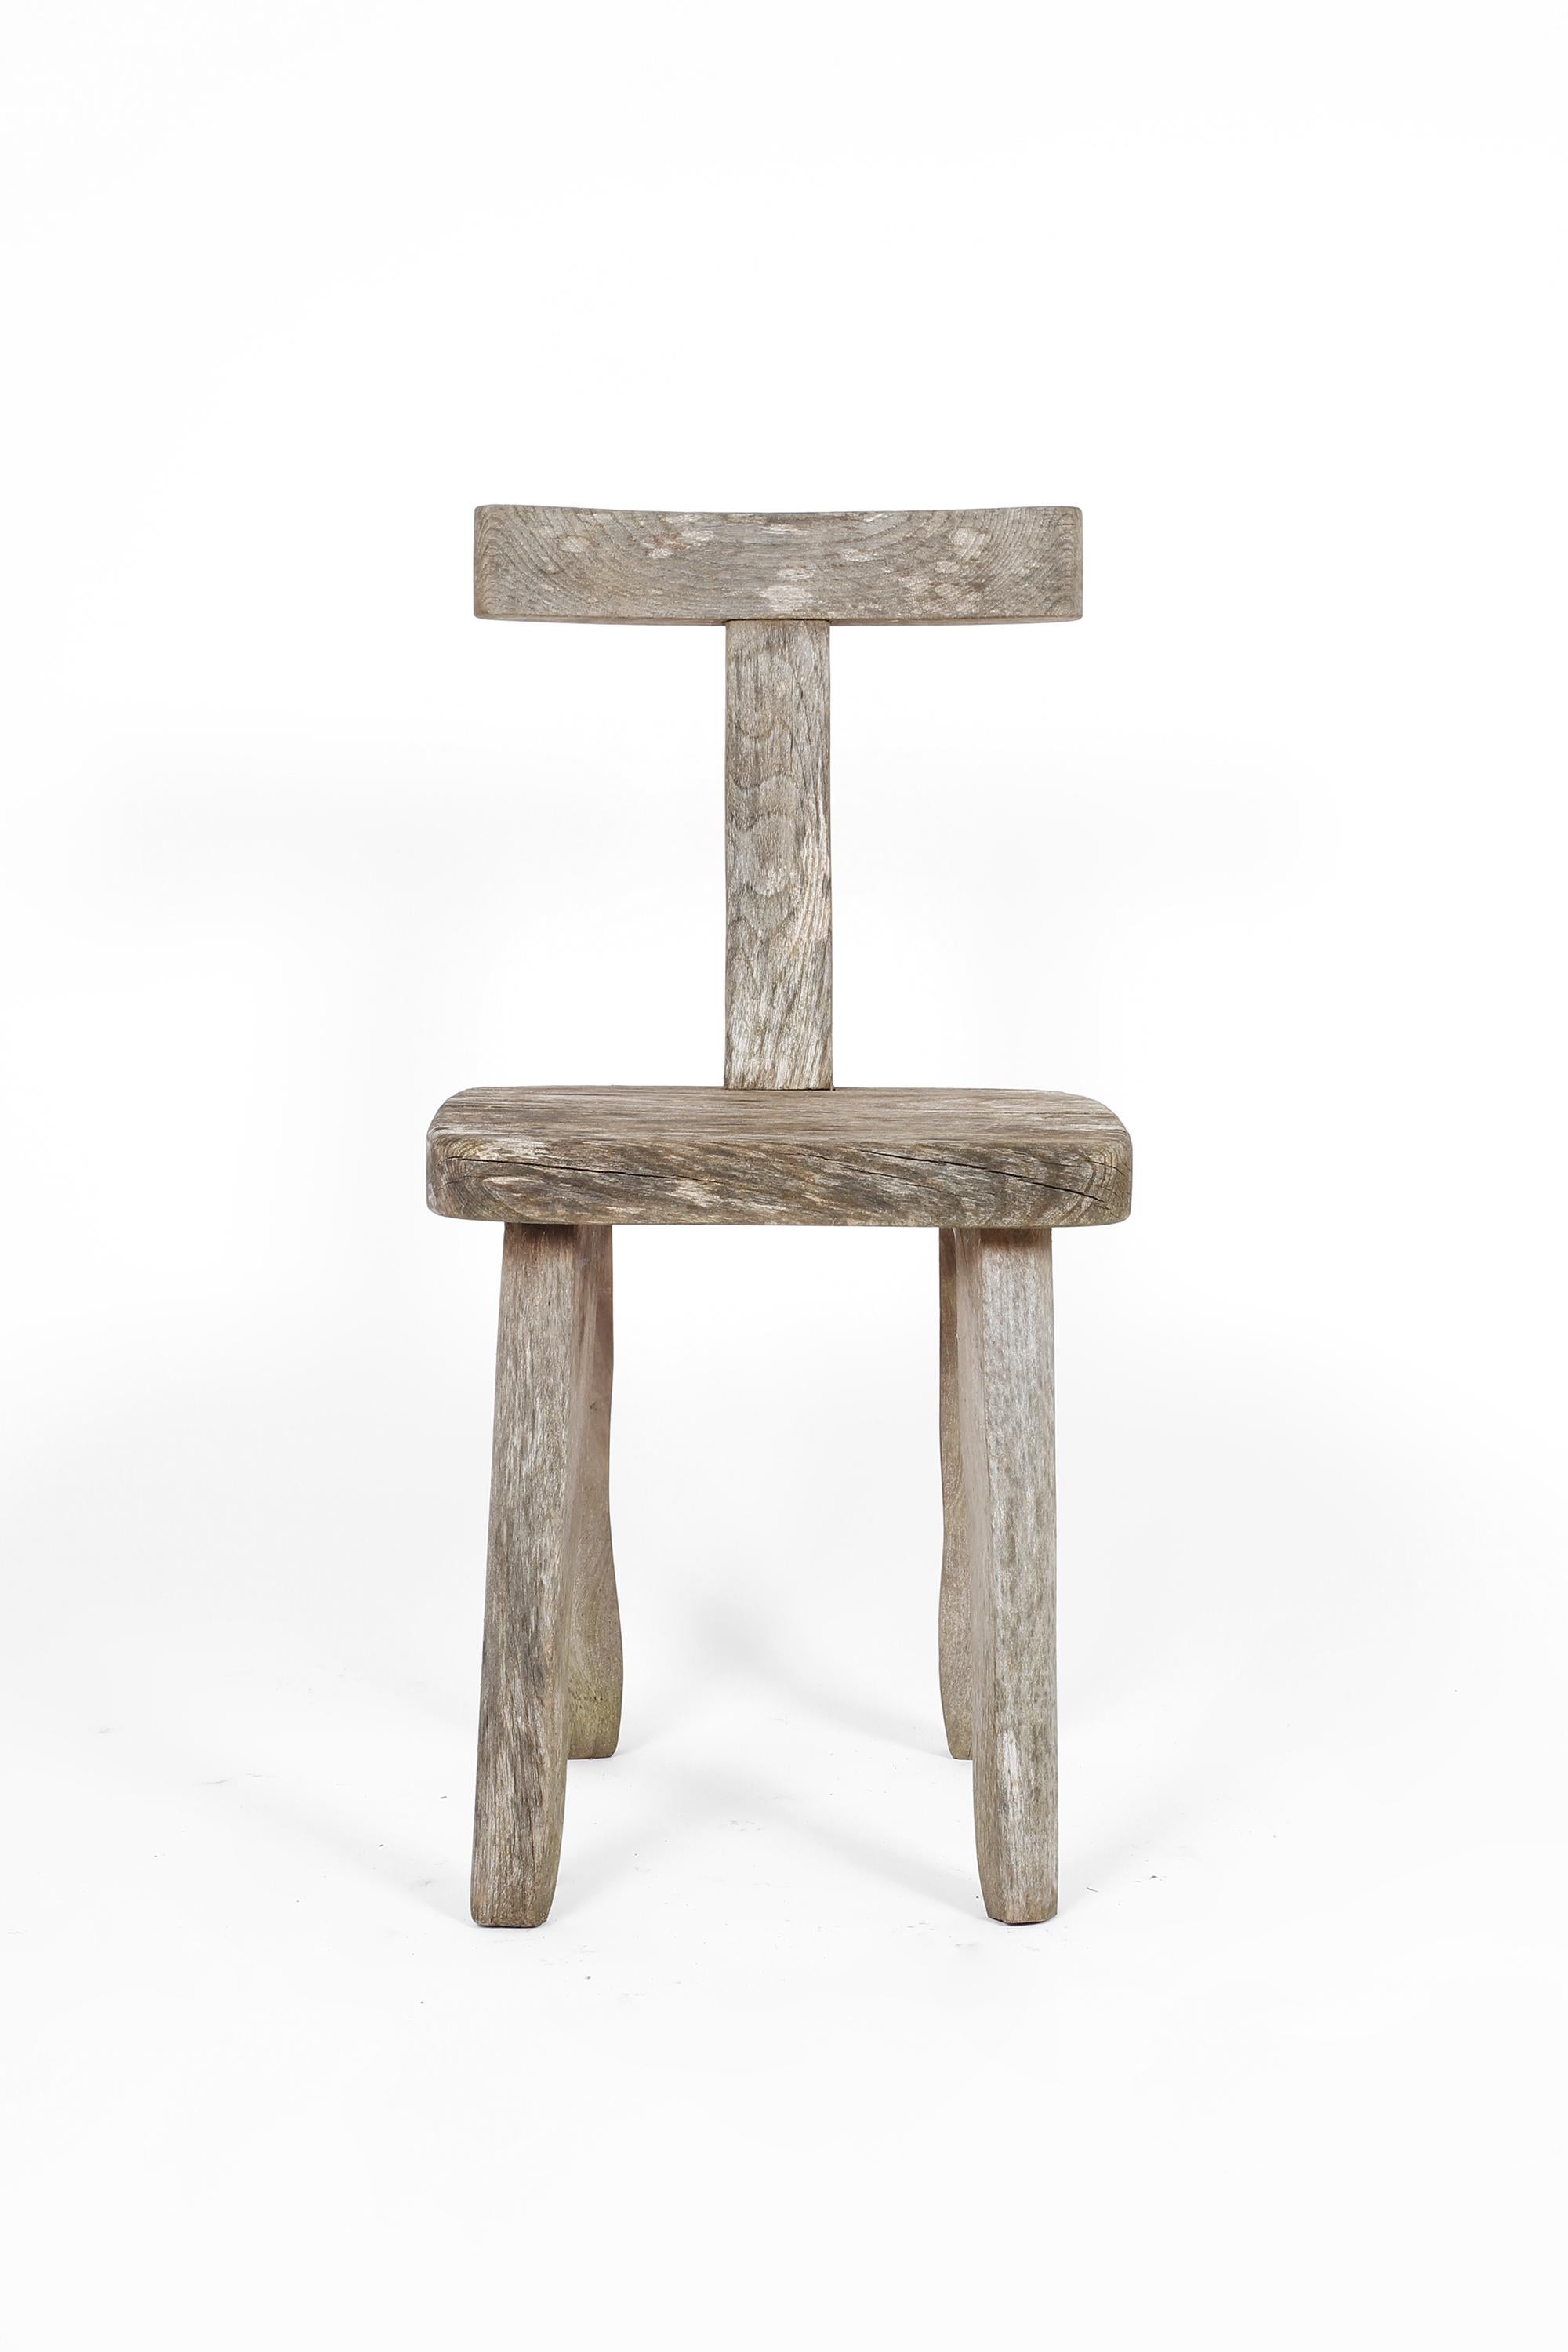 Weathered Elm T Chair attributed to Olavi Hanninen 2